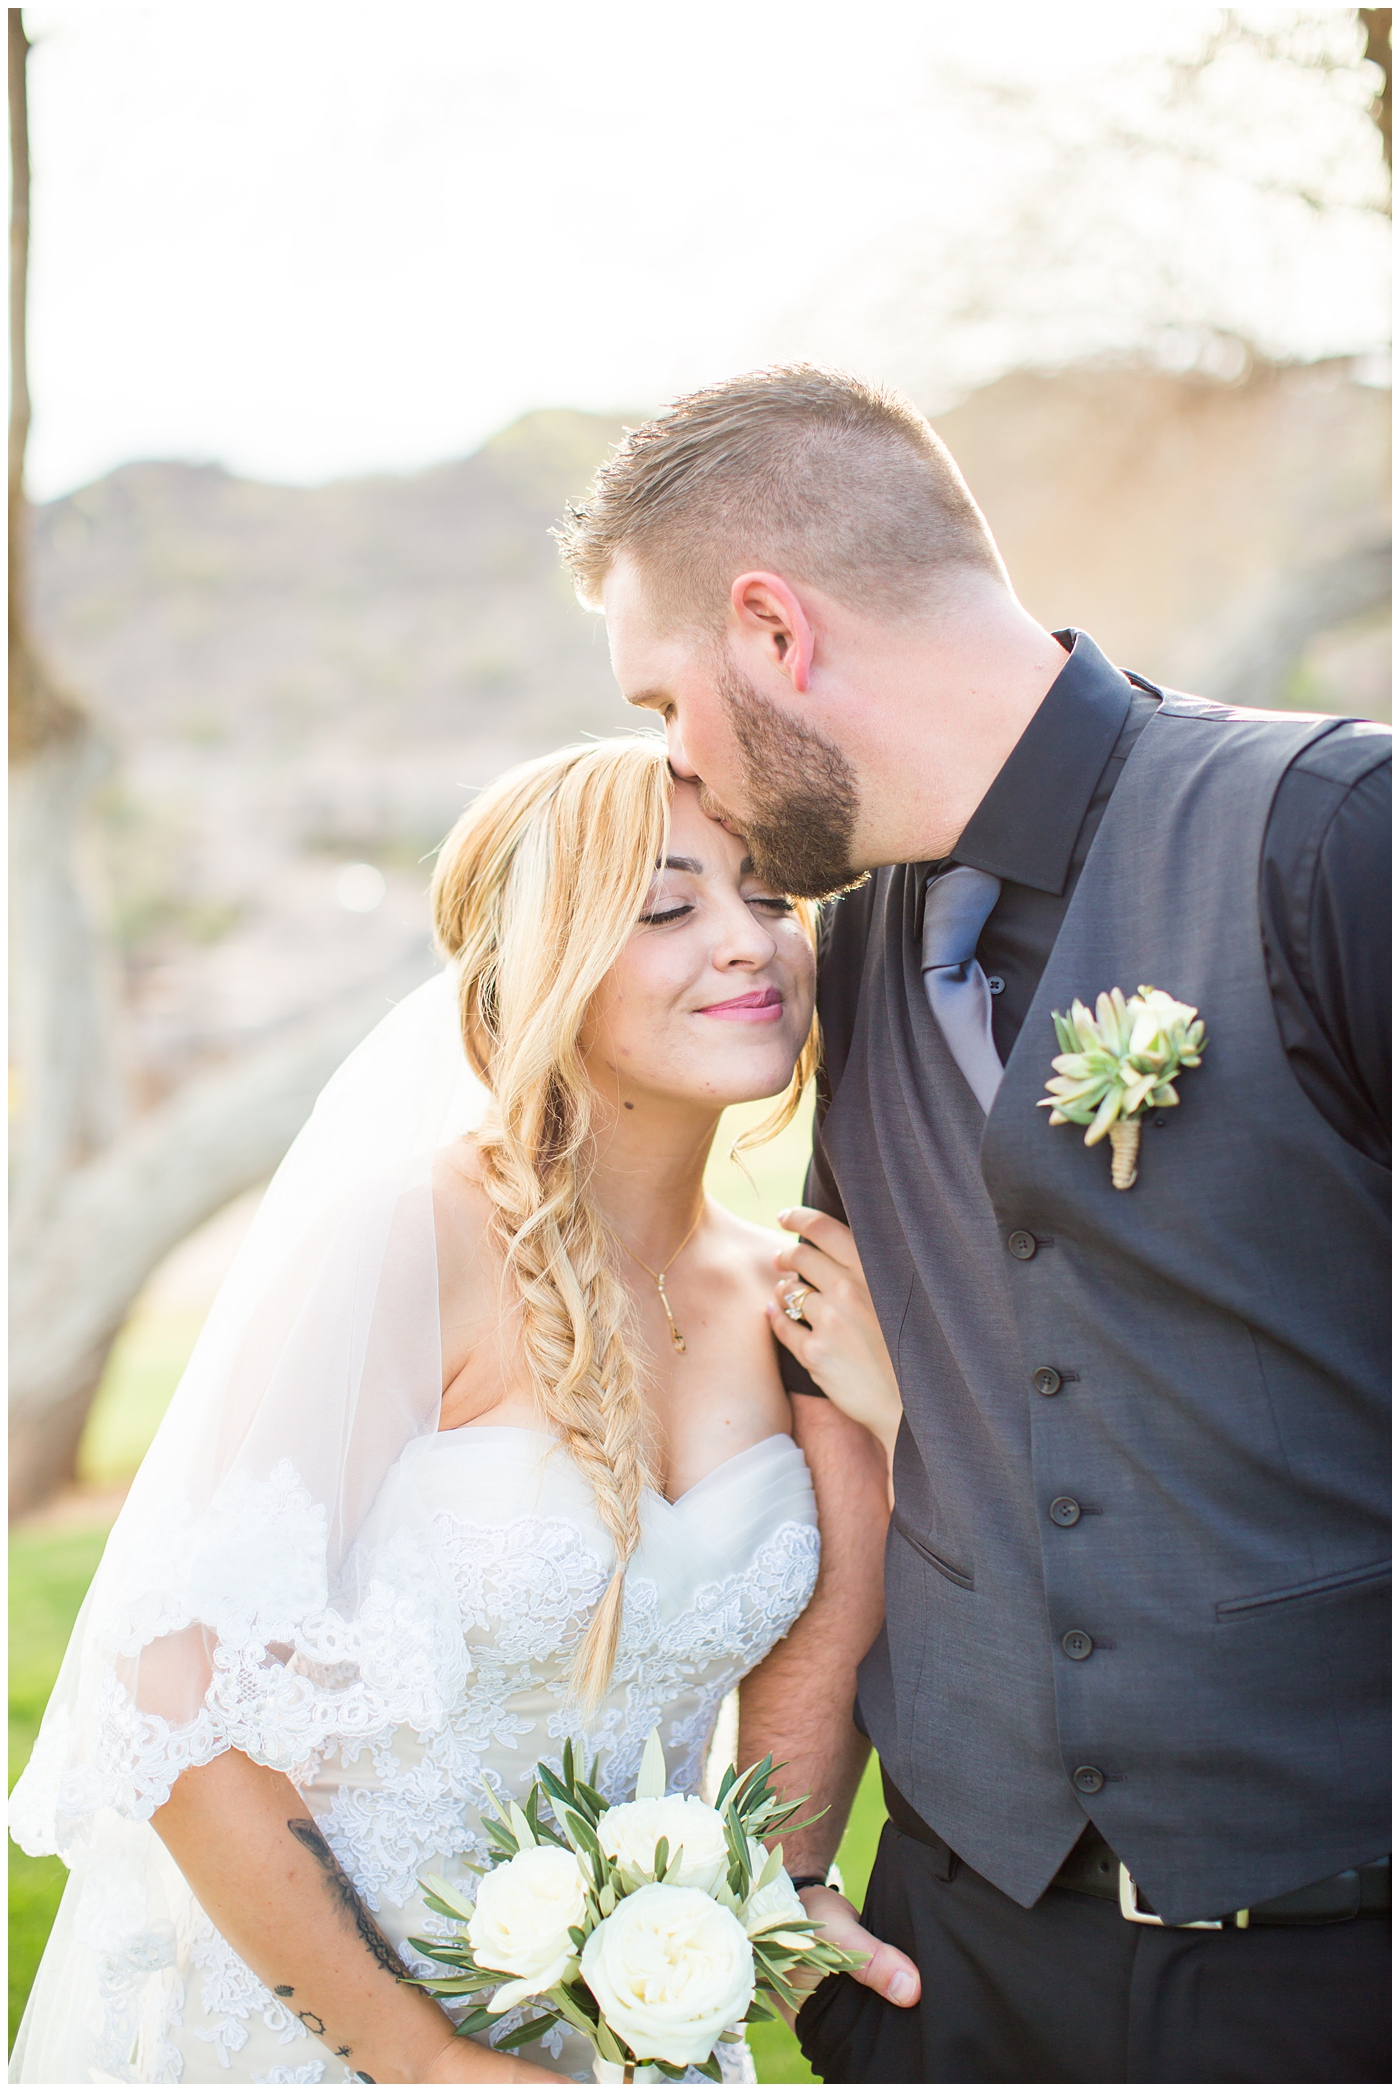 bride with fishtail braid and strapless dress with white rose and greenery bouquet with groom in black pants and vest and tie with rolled up shirt sleeves with succulent boutonniere wedding day portrait